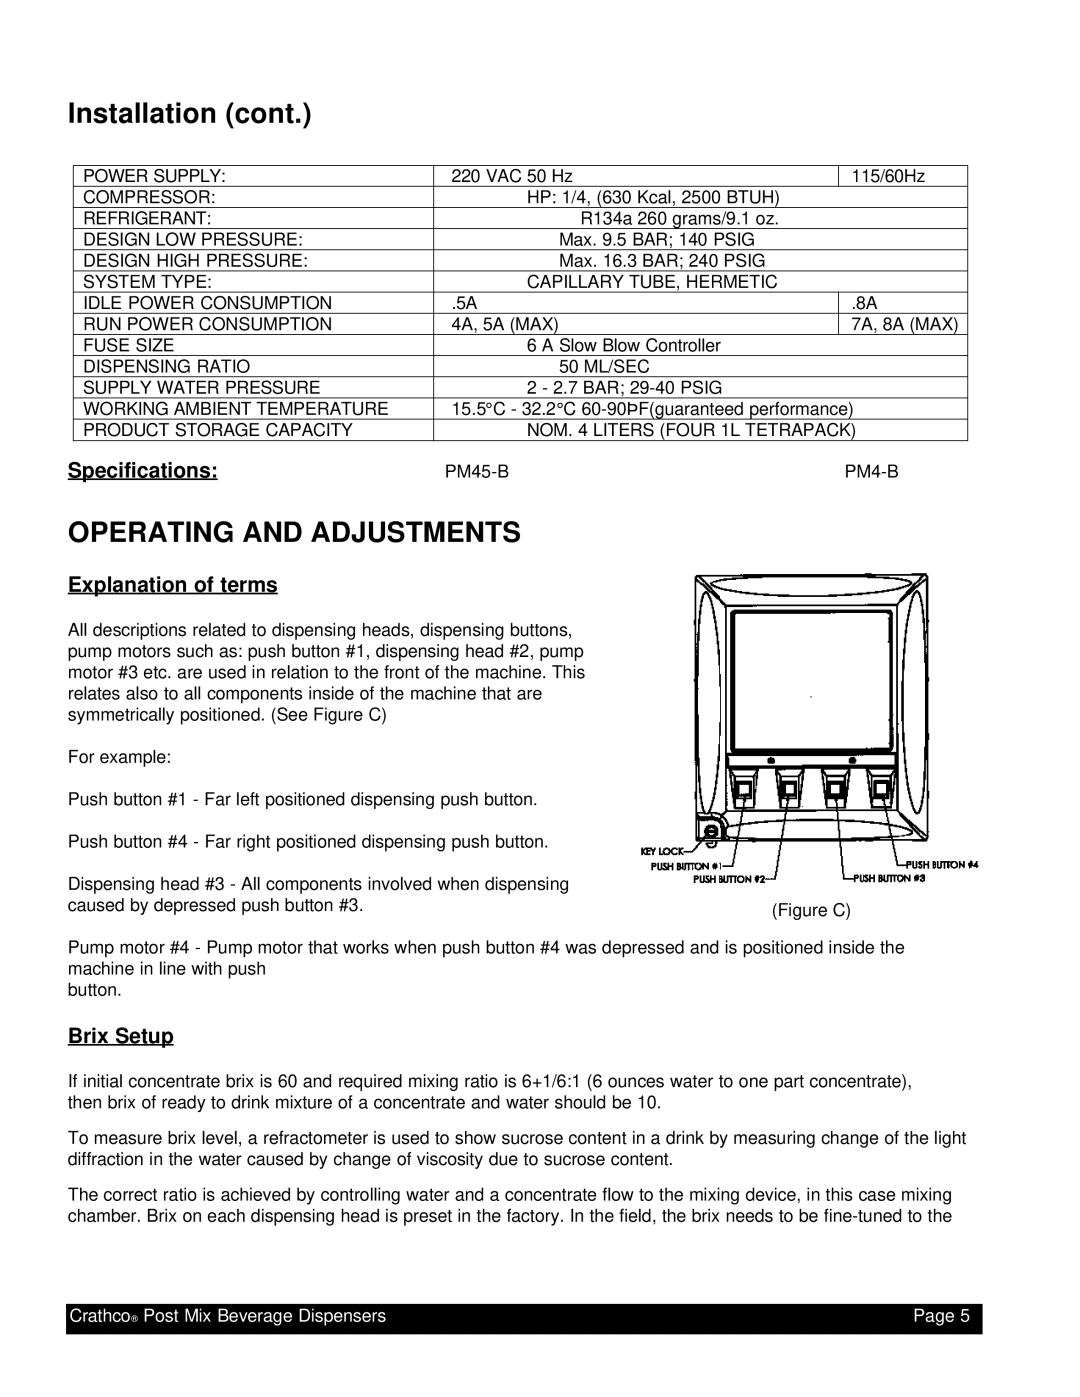 Grindmaster PM45-B Installation cont, Operating And Adjustments, Specifications, Explanation of terms, Brix Setup, Page 